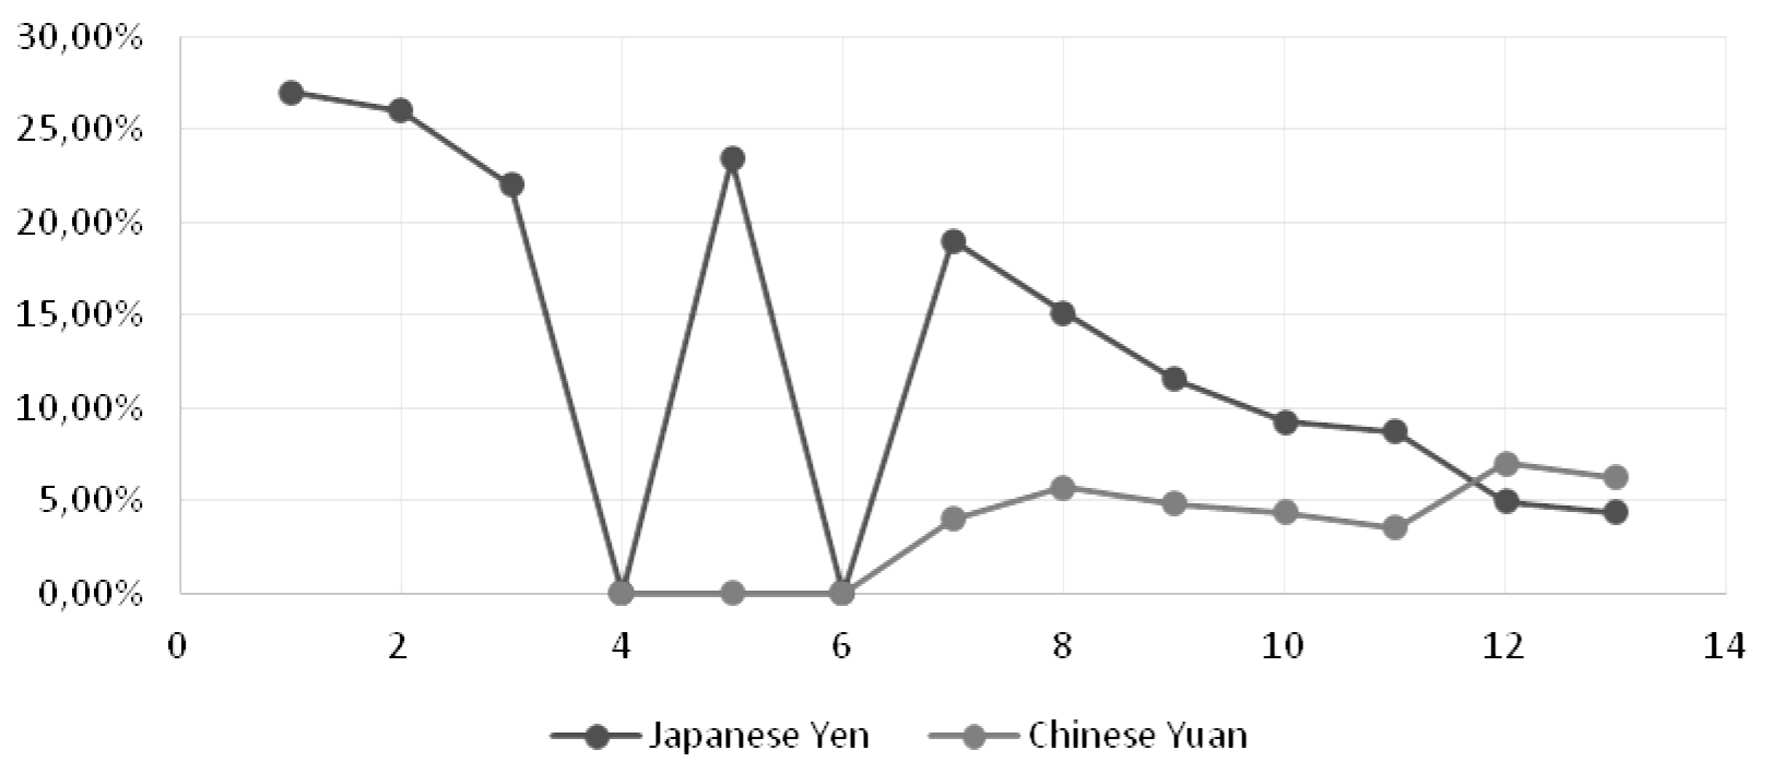 Figure 2. Kenya’s % of External Debt by Major Currencies – Japan Yen and Chinese Yuan. Data from: [22].